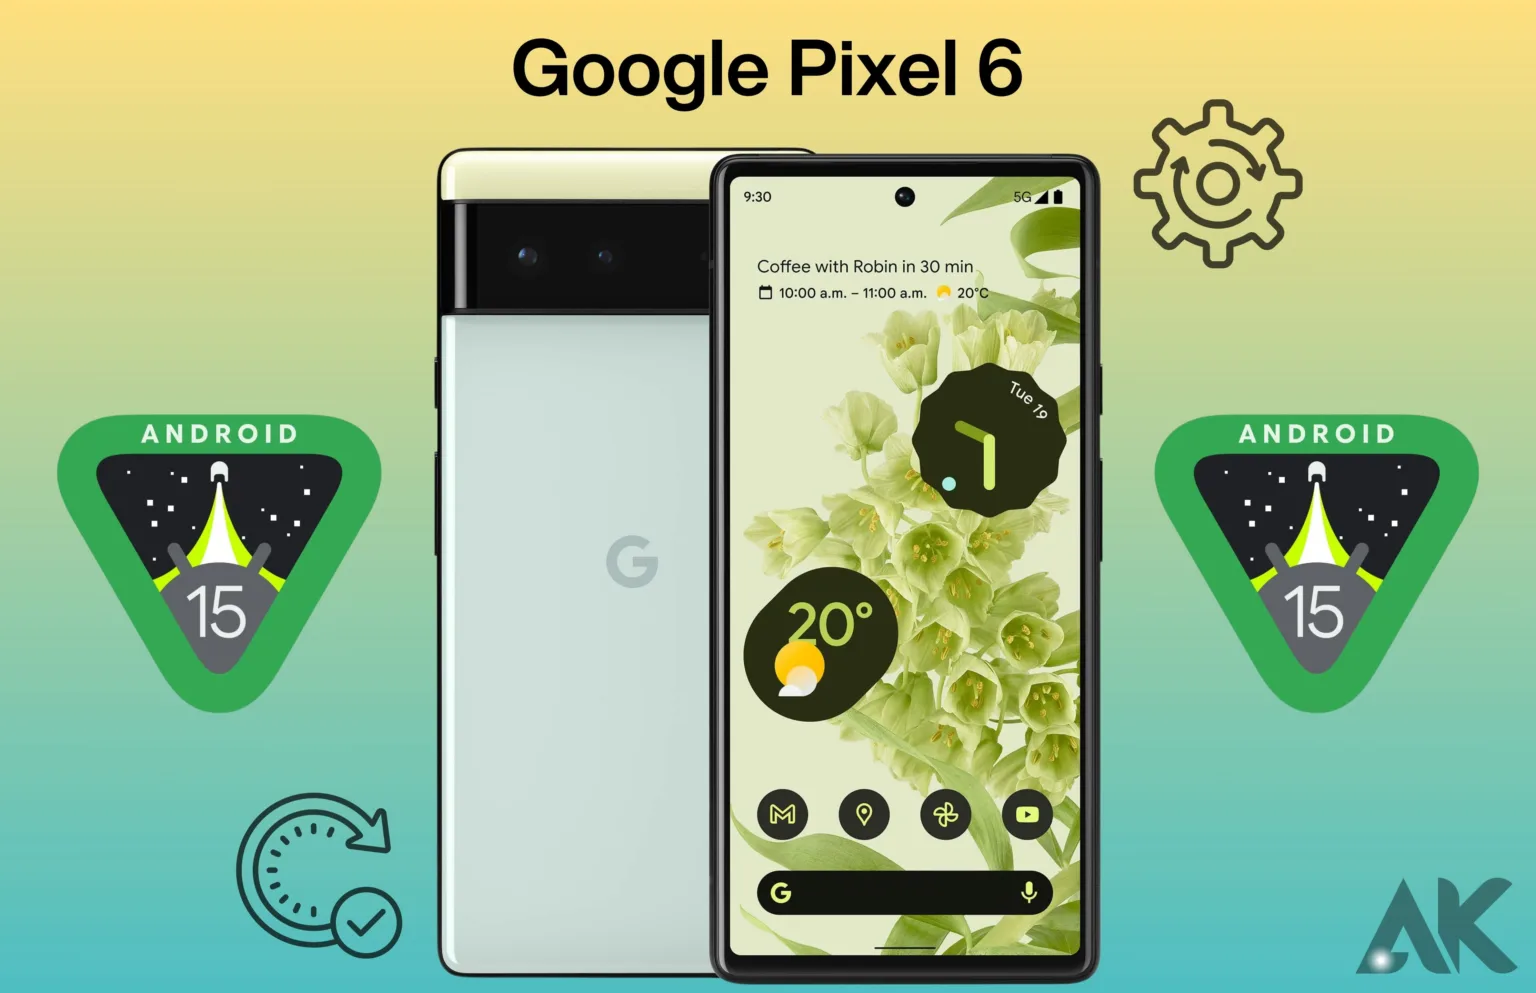 Will pixel 6 get android 15 update?